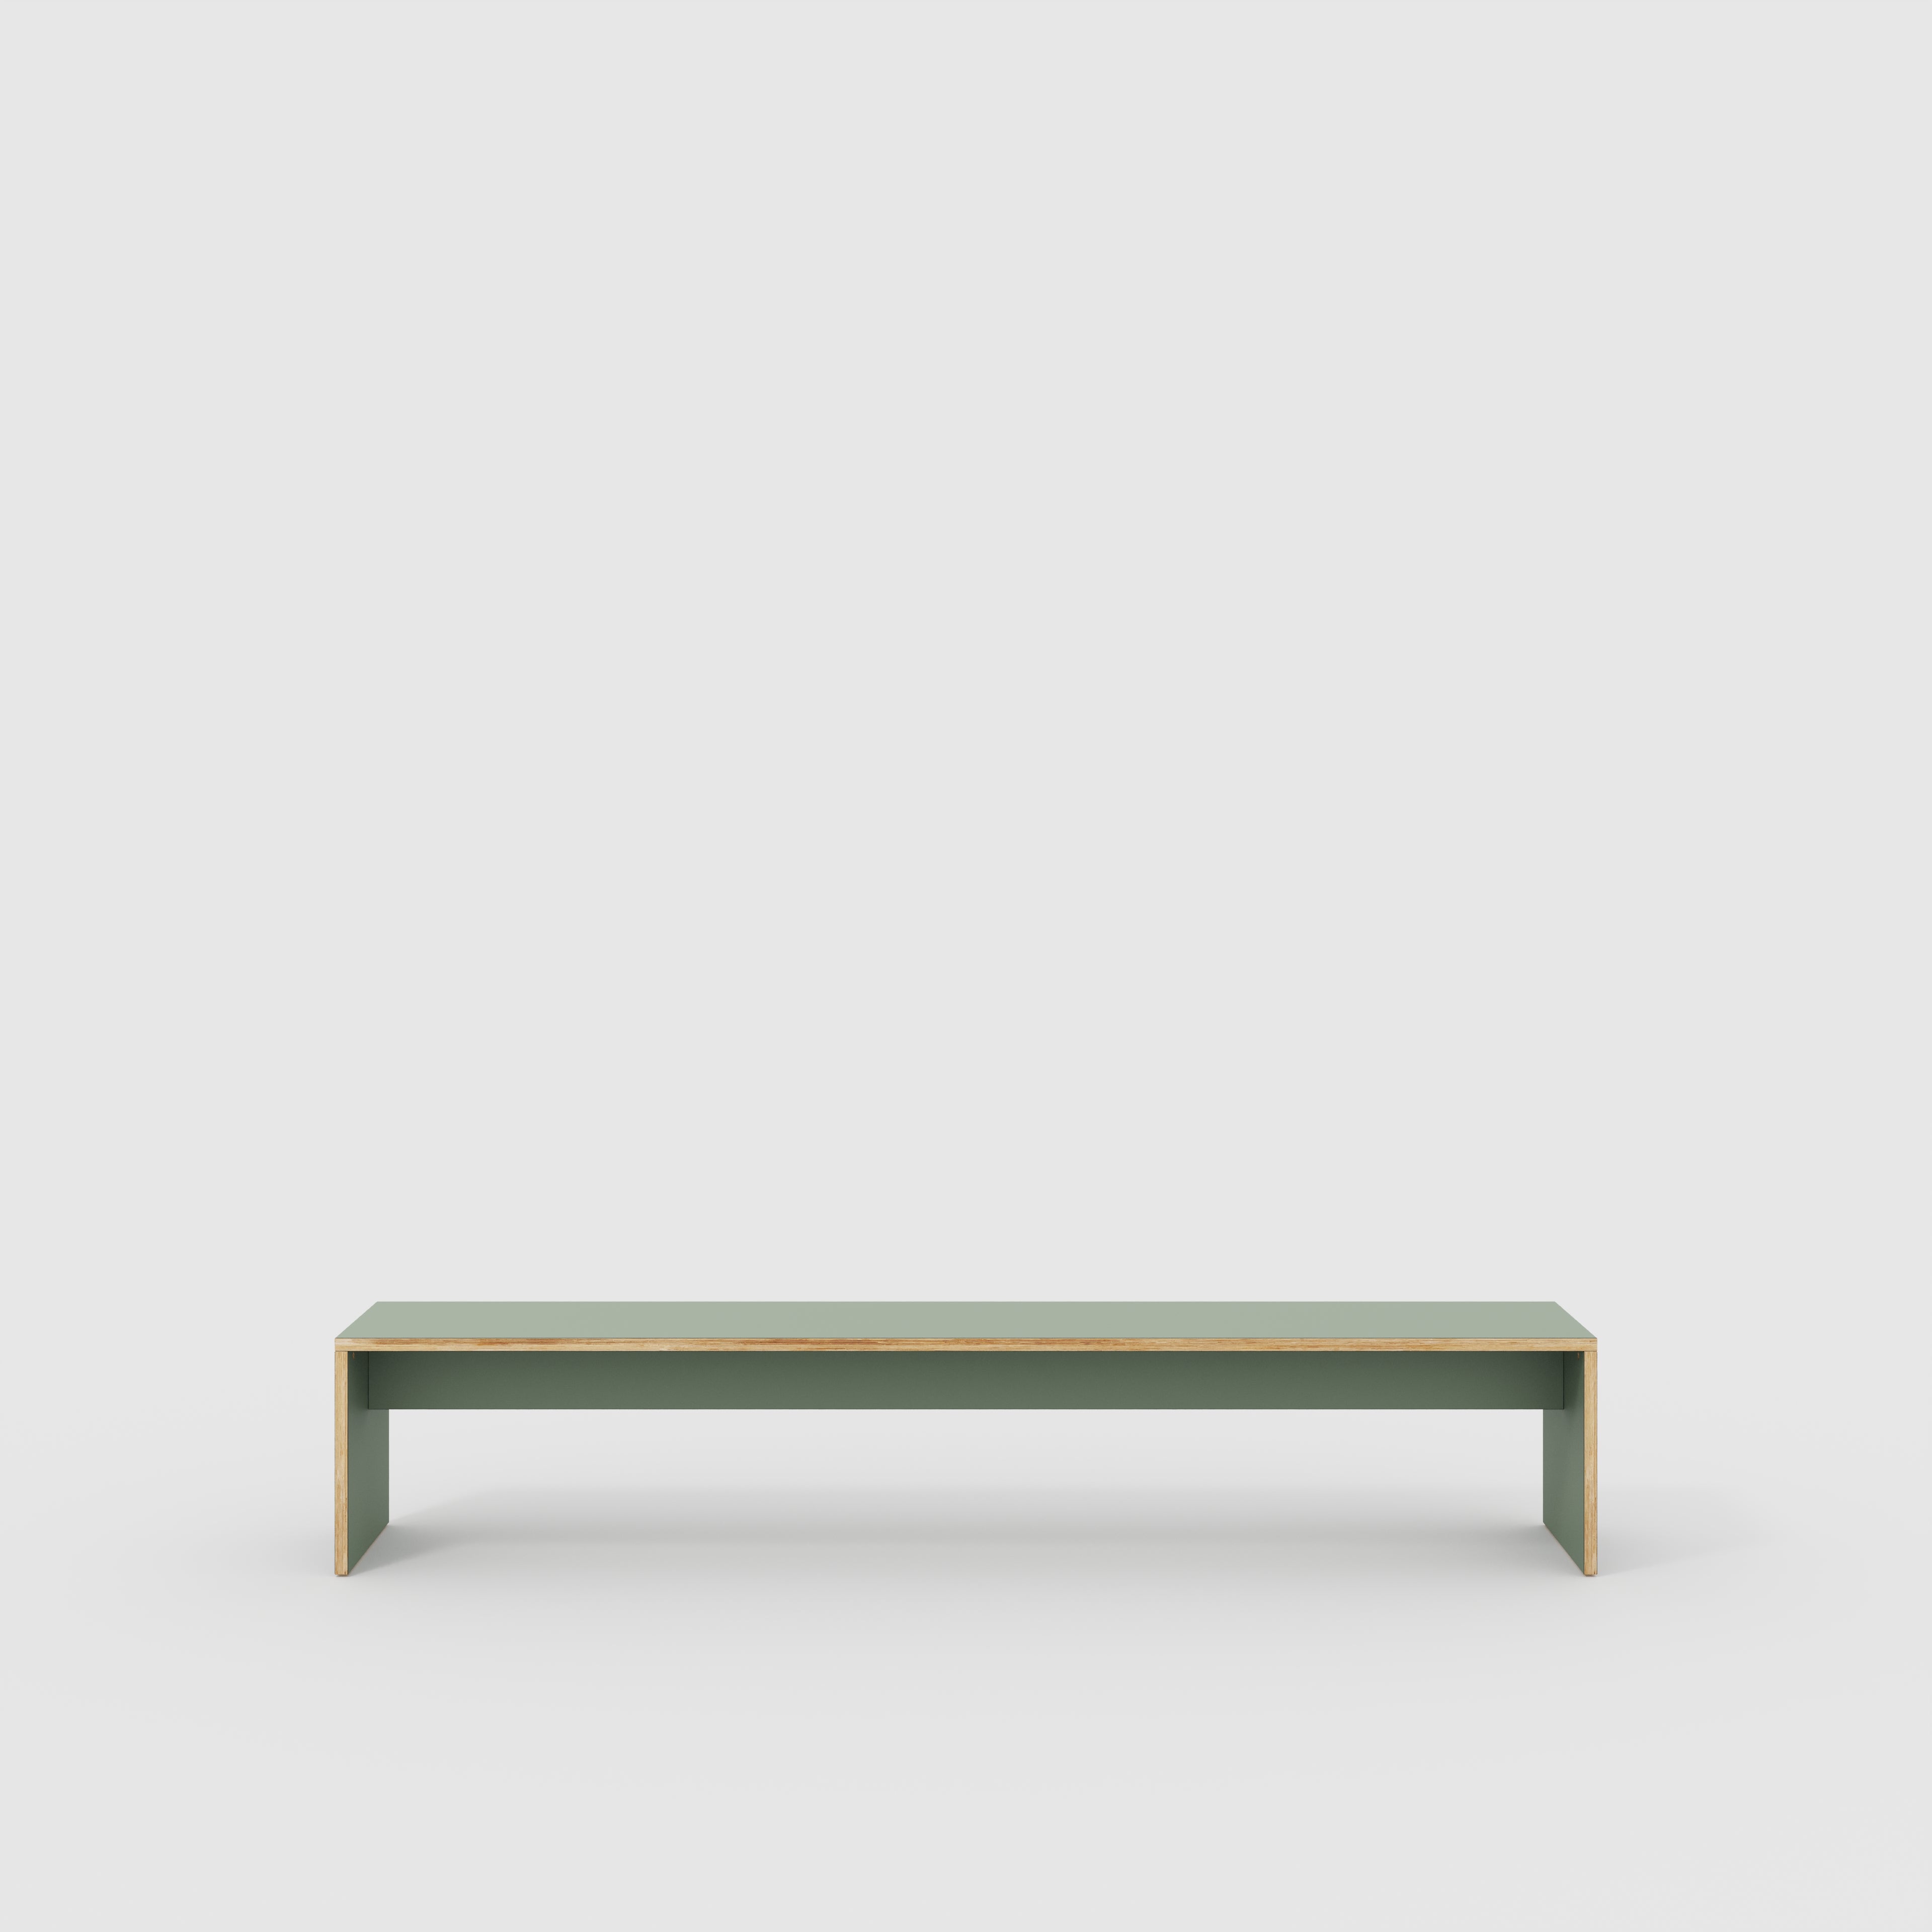 Bench Seat with Solid Sides - Formica Green Slate - 2400(w) x 400(d)